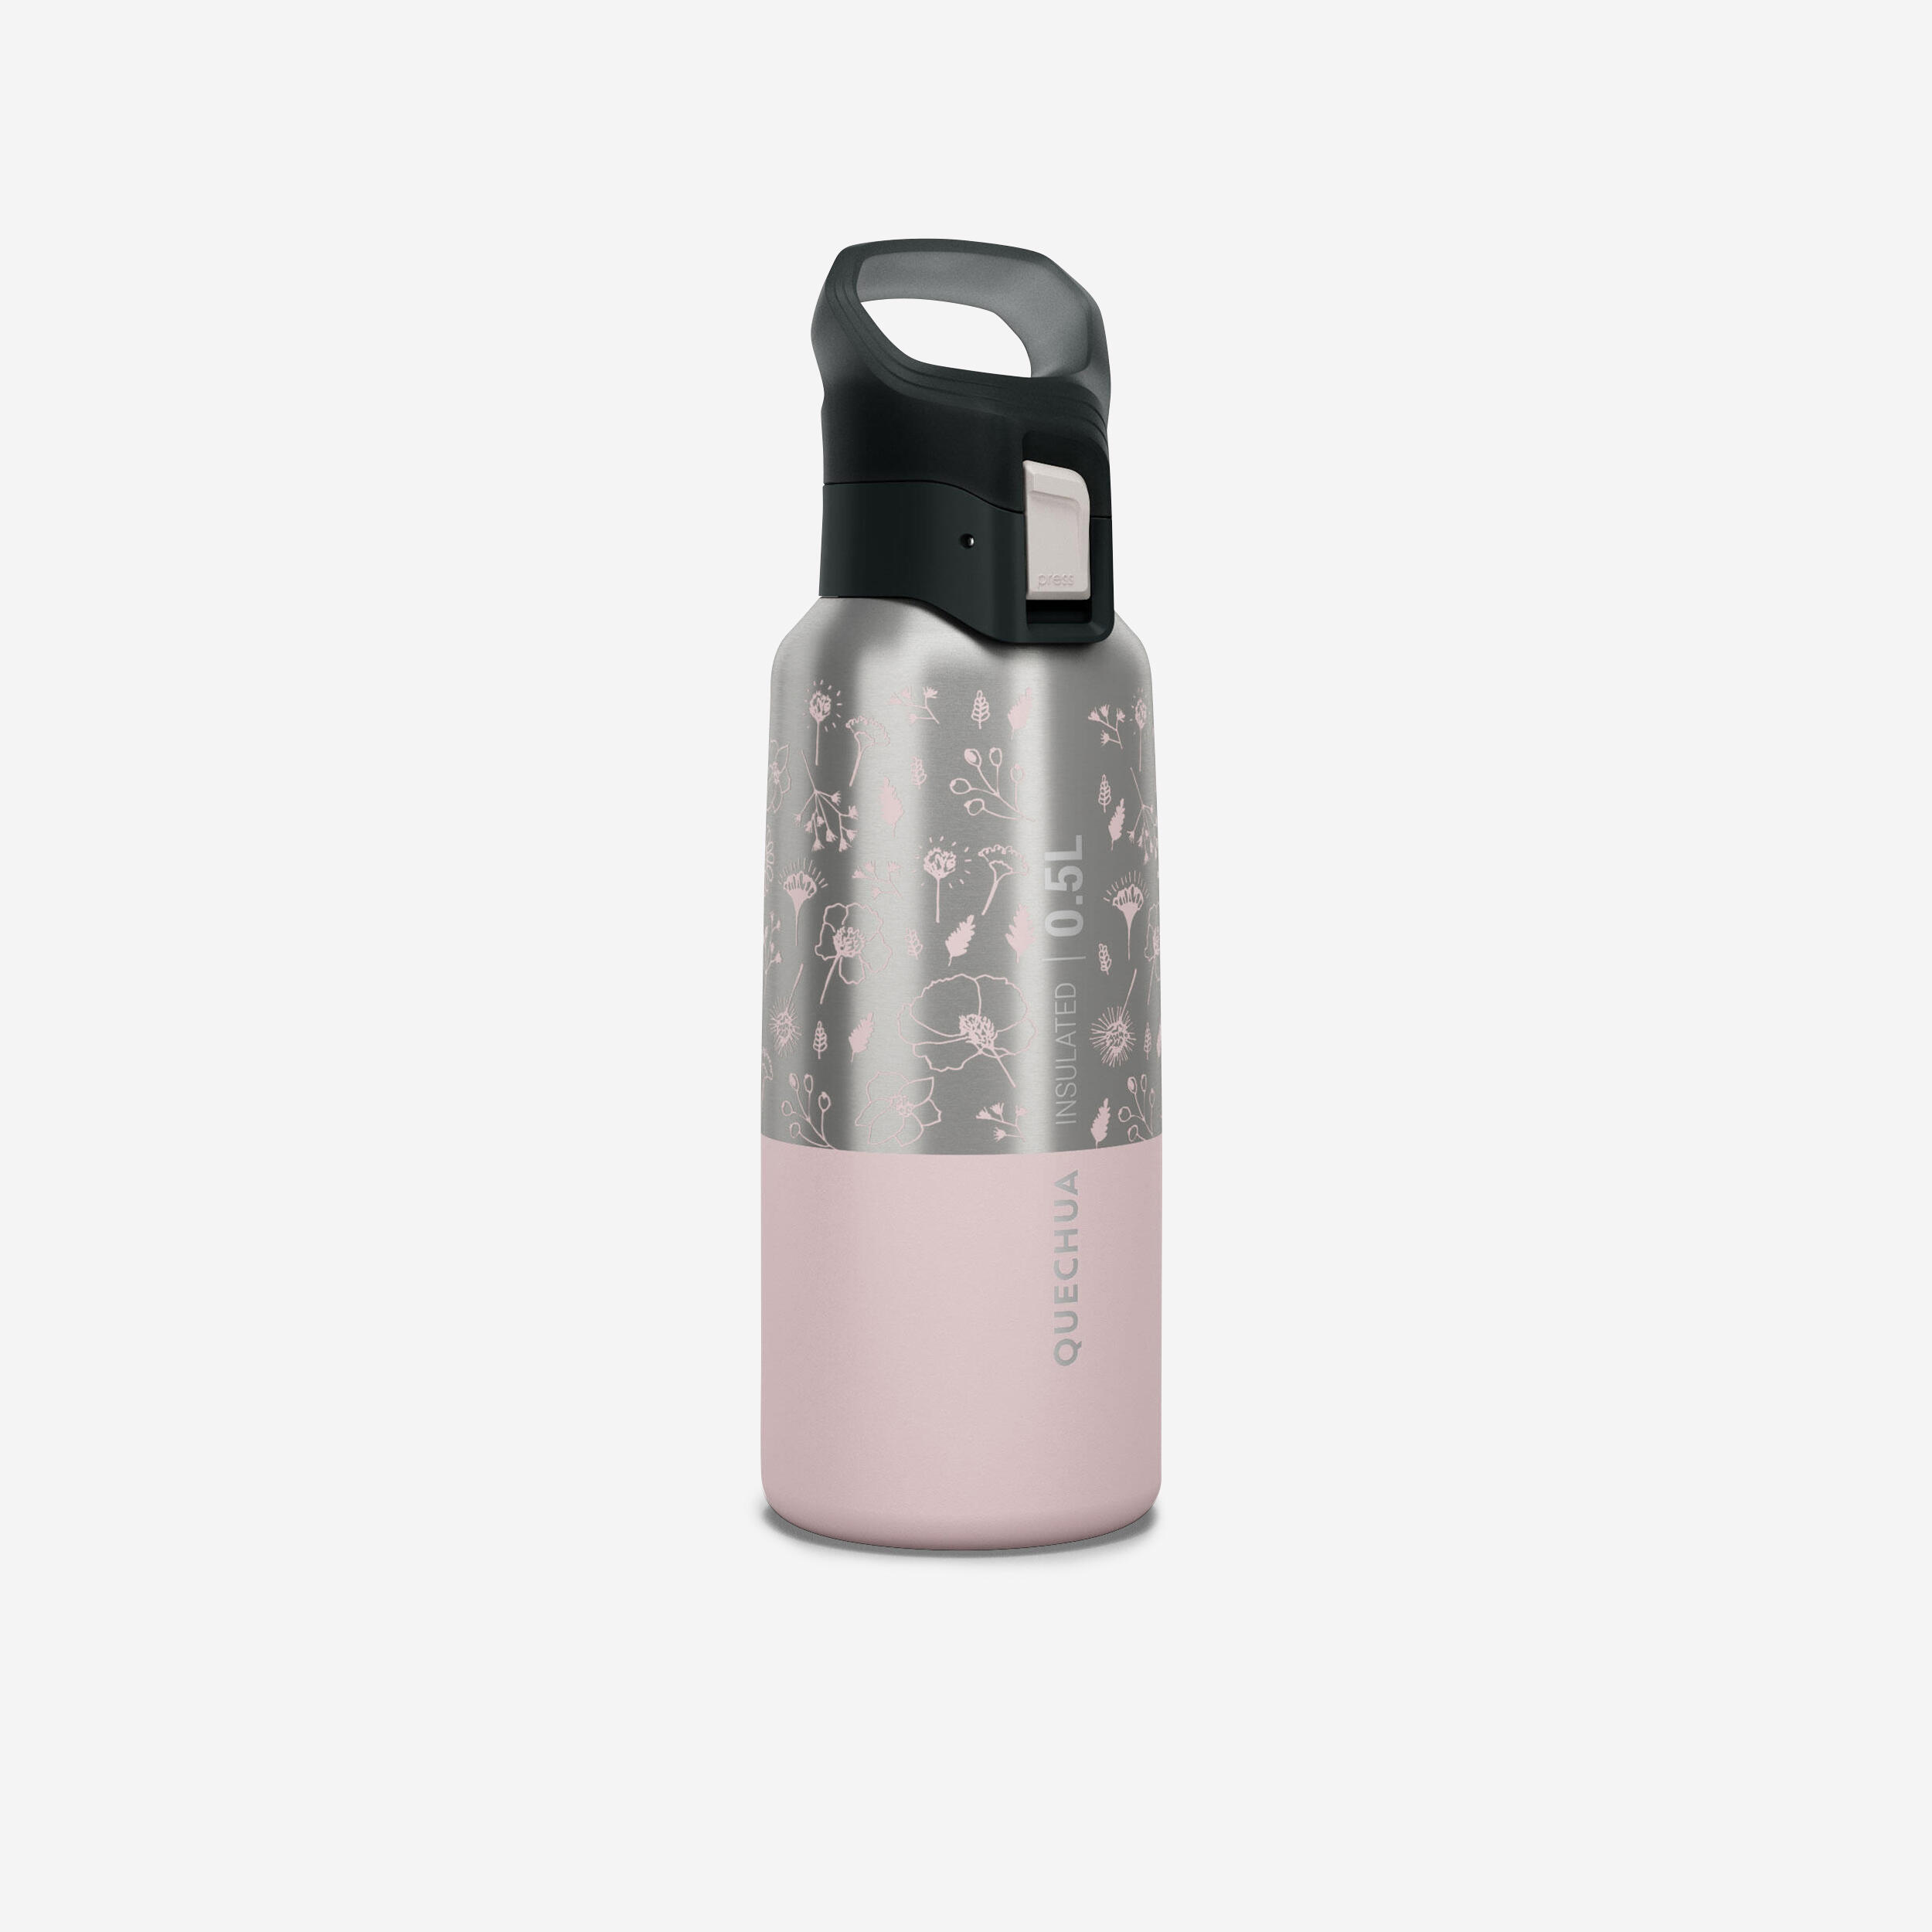 Hiking Insulated Stainless Steel Flask MH500 0.5L Pink 1/12